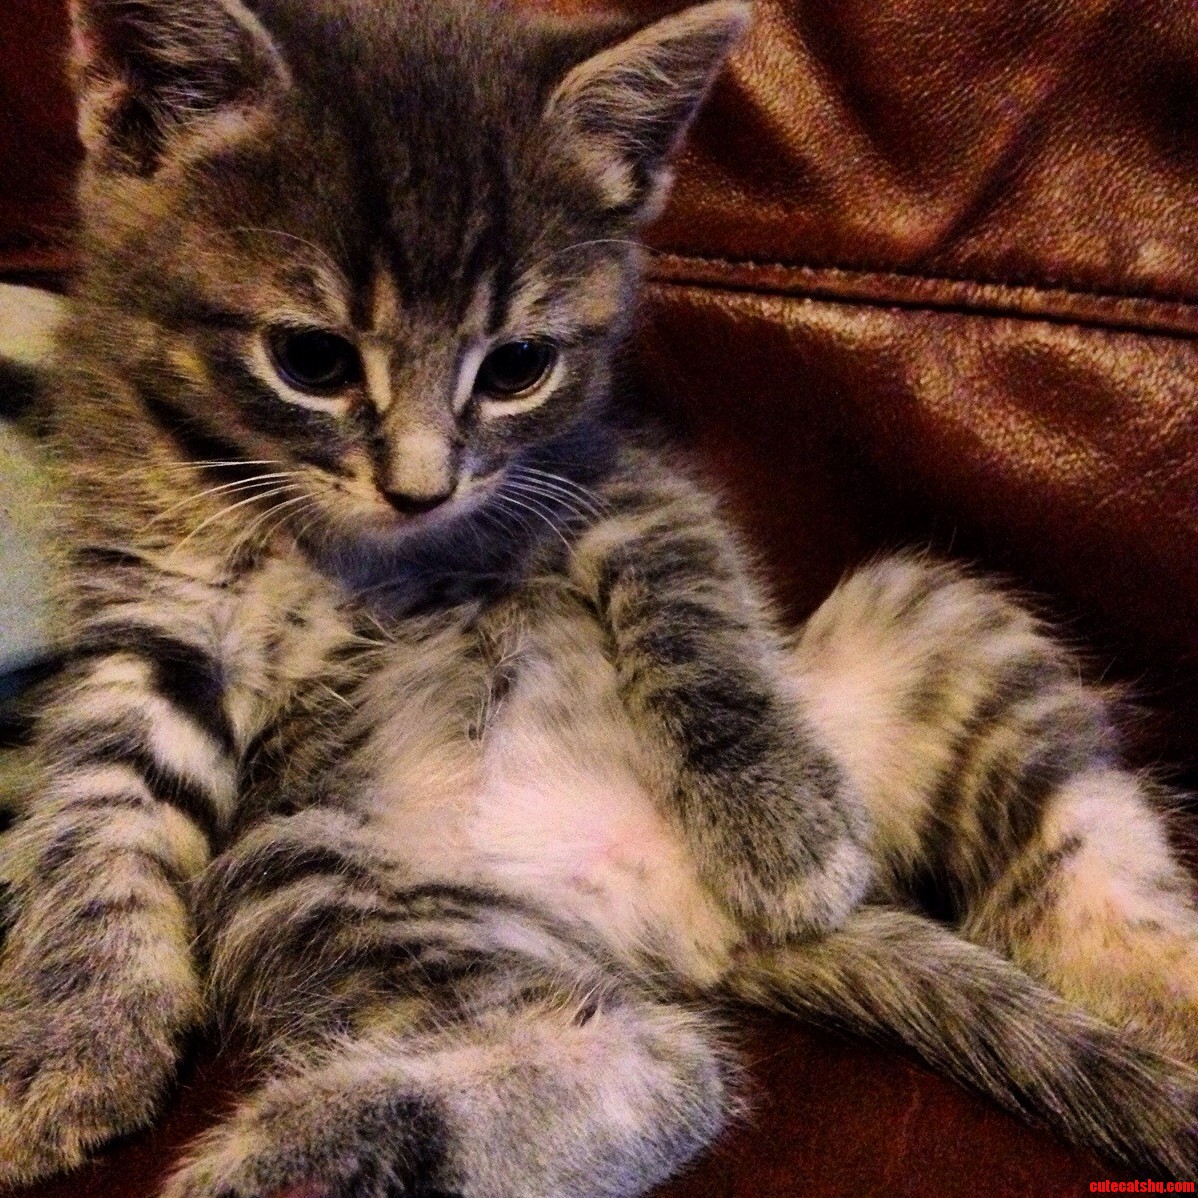 This kitten looks like hes had a long day